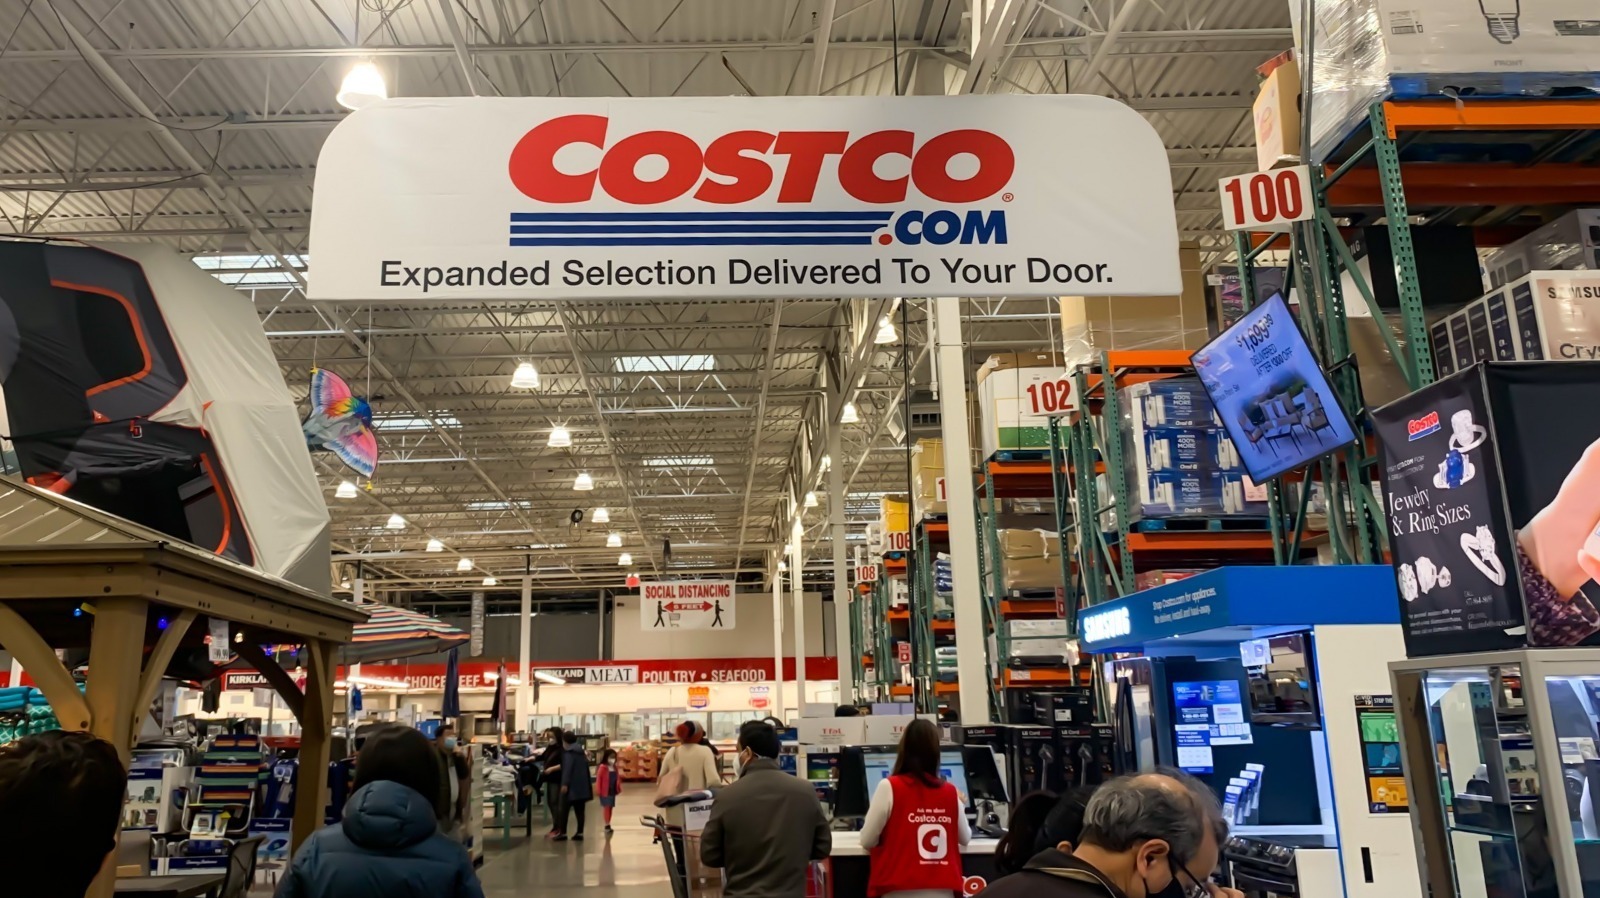 Is Costco Open On Easter Sunday 2022?